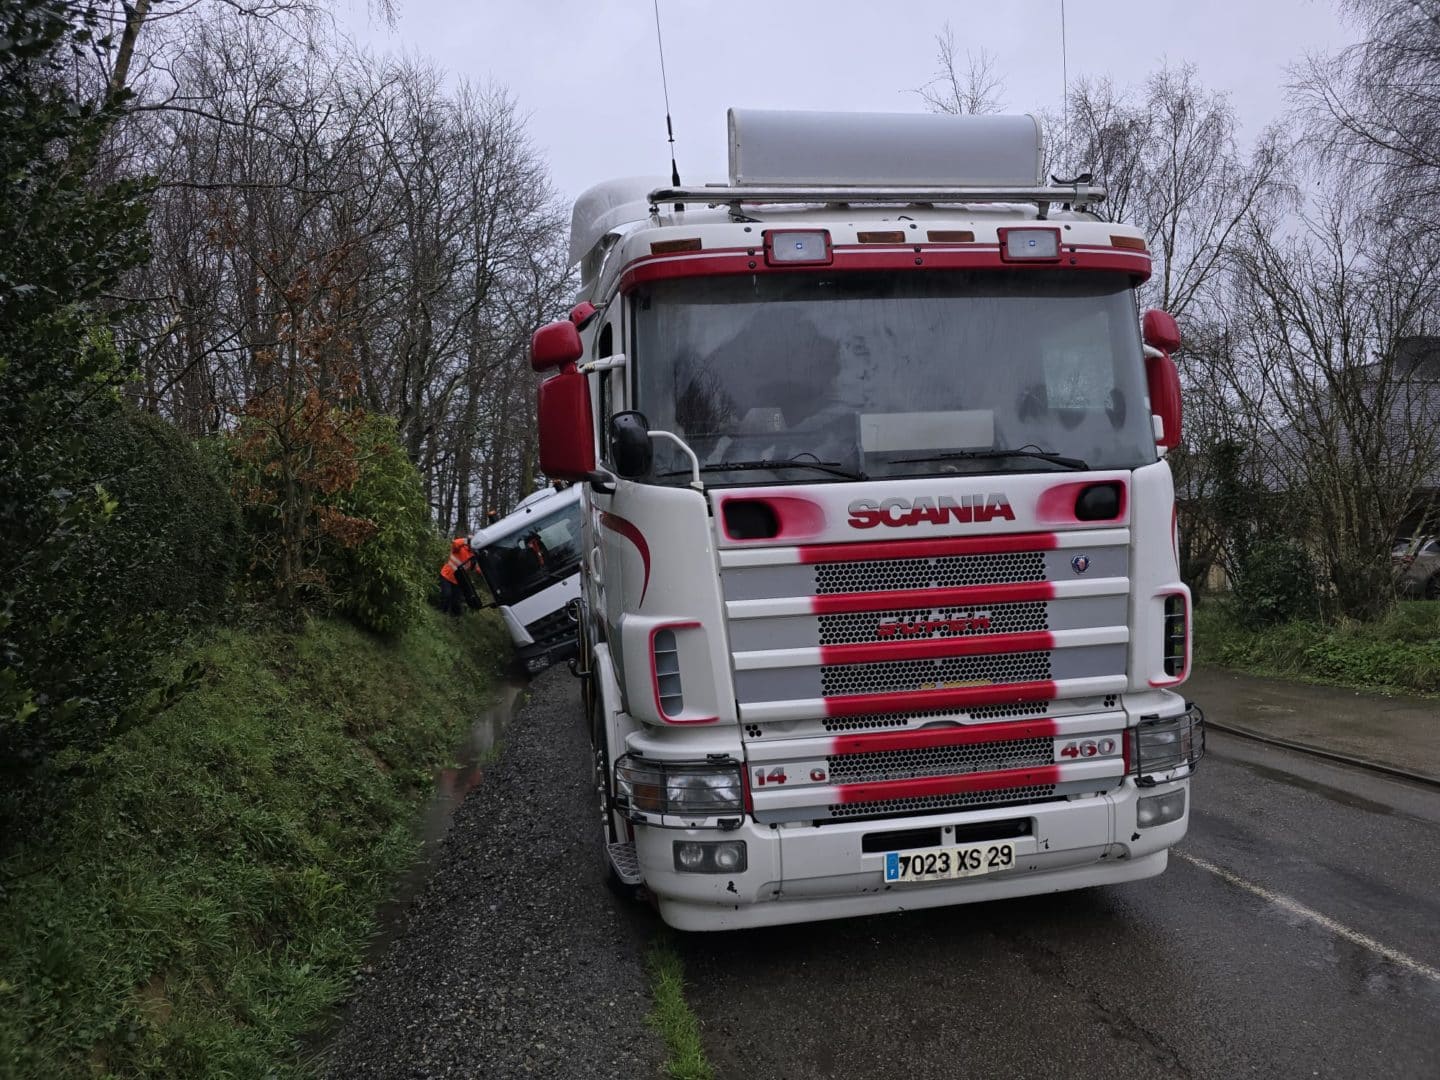 Relevage camion poids lourd accident - Relevage poids lourd